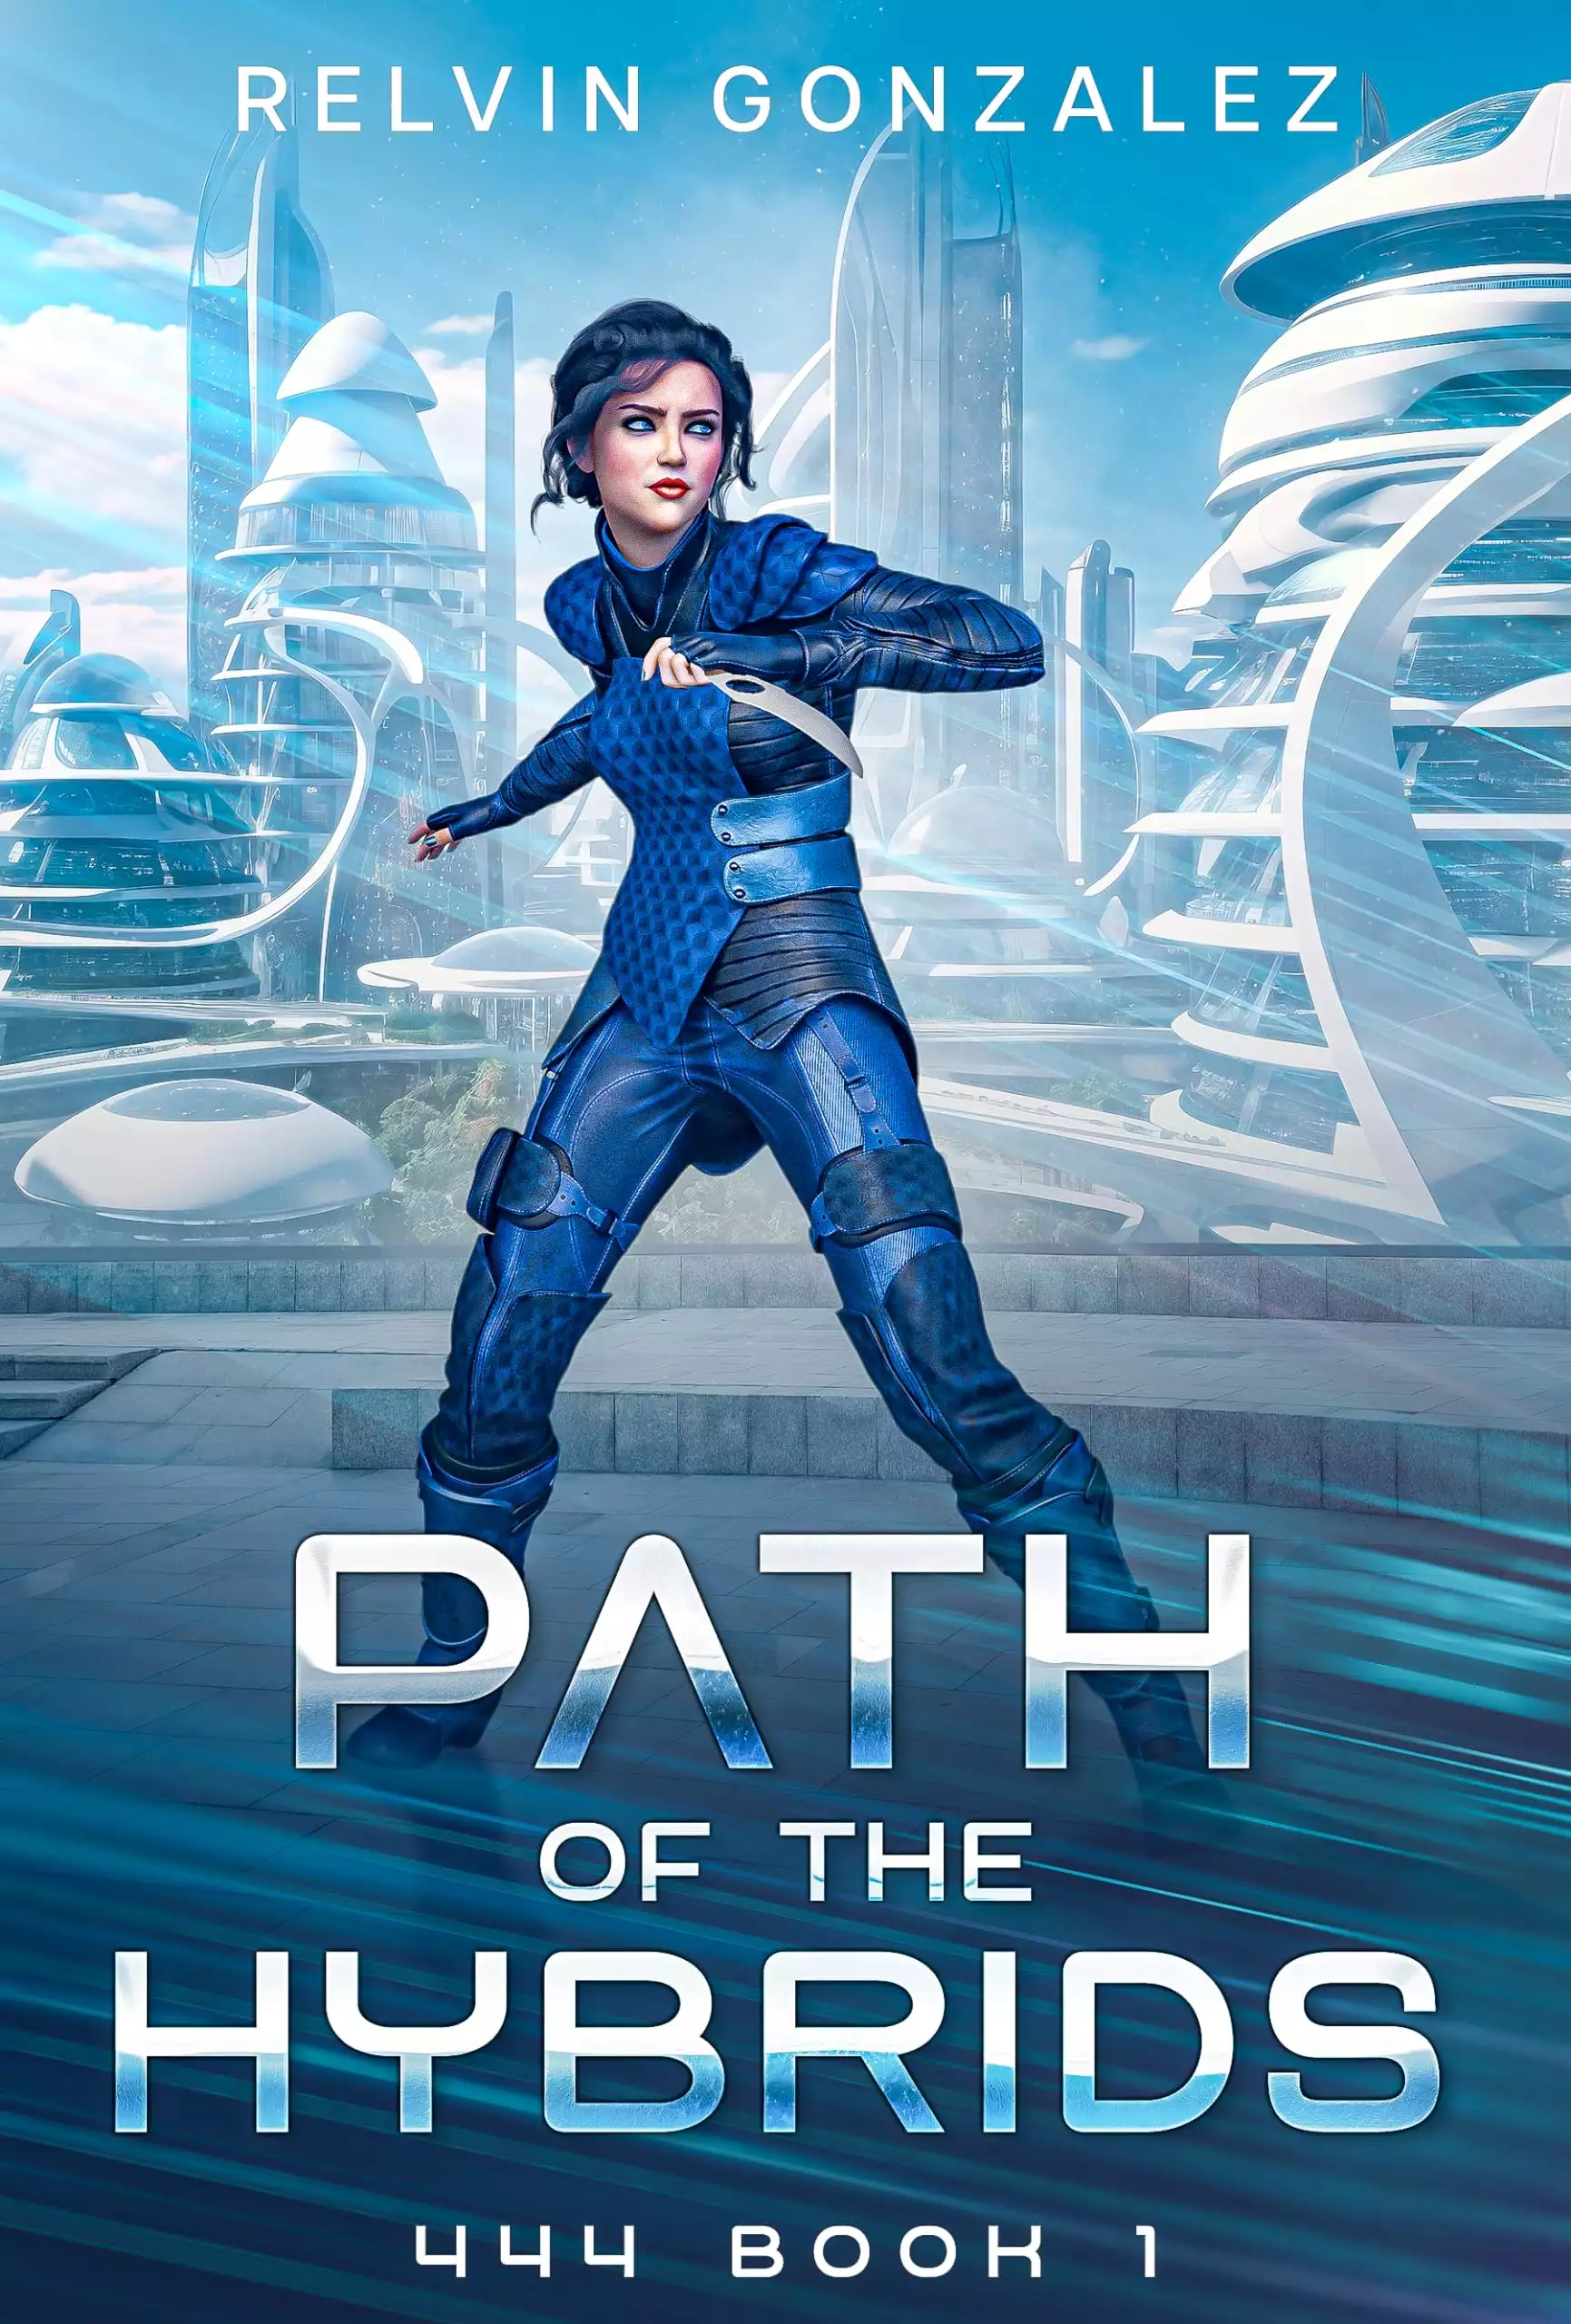 Path of the Hybrids: A Genetic Engineering Science Fantasy Story